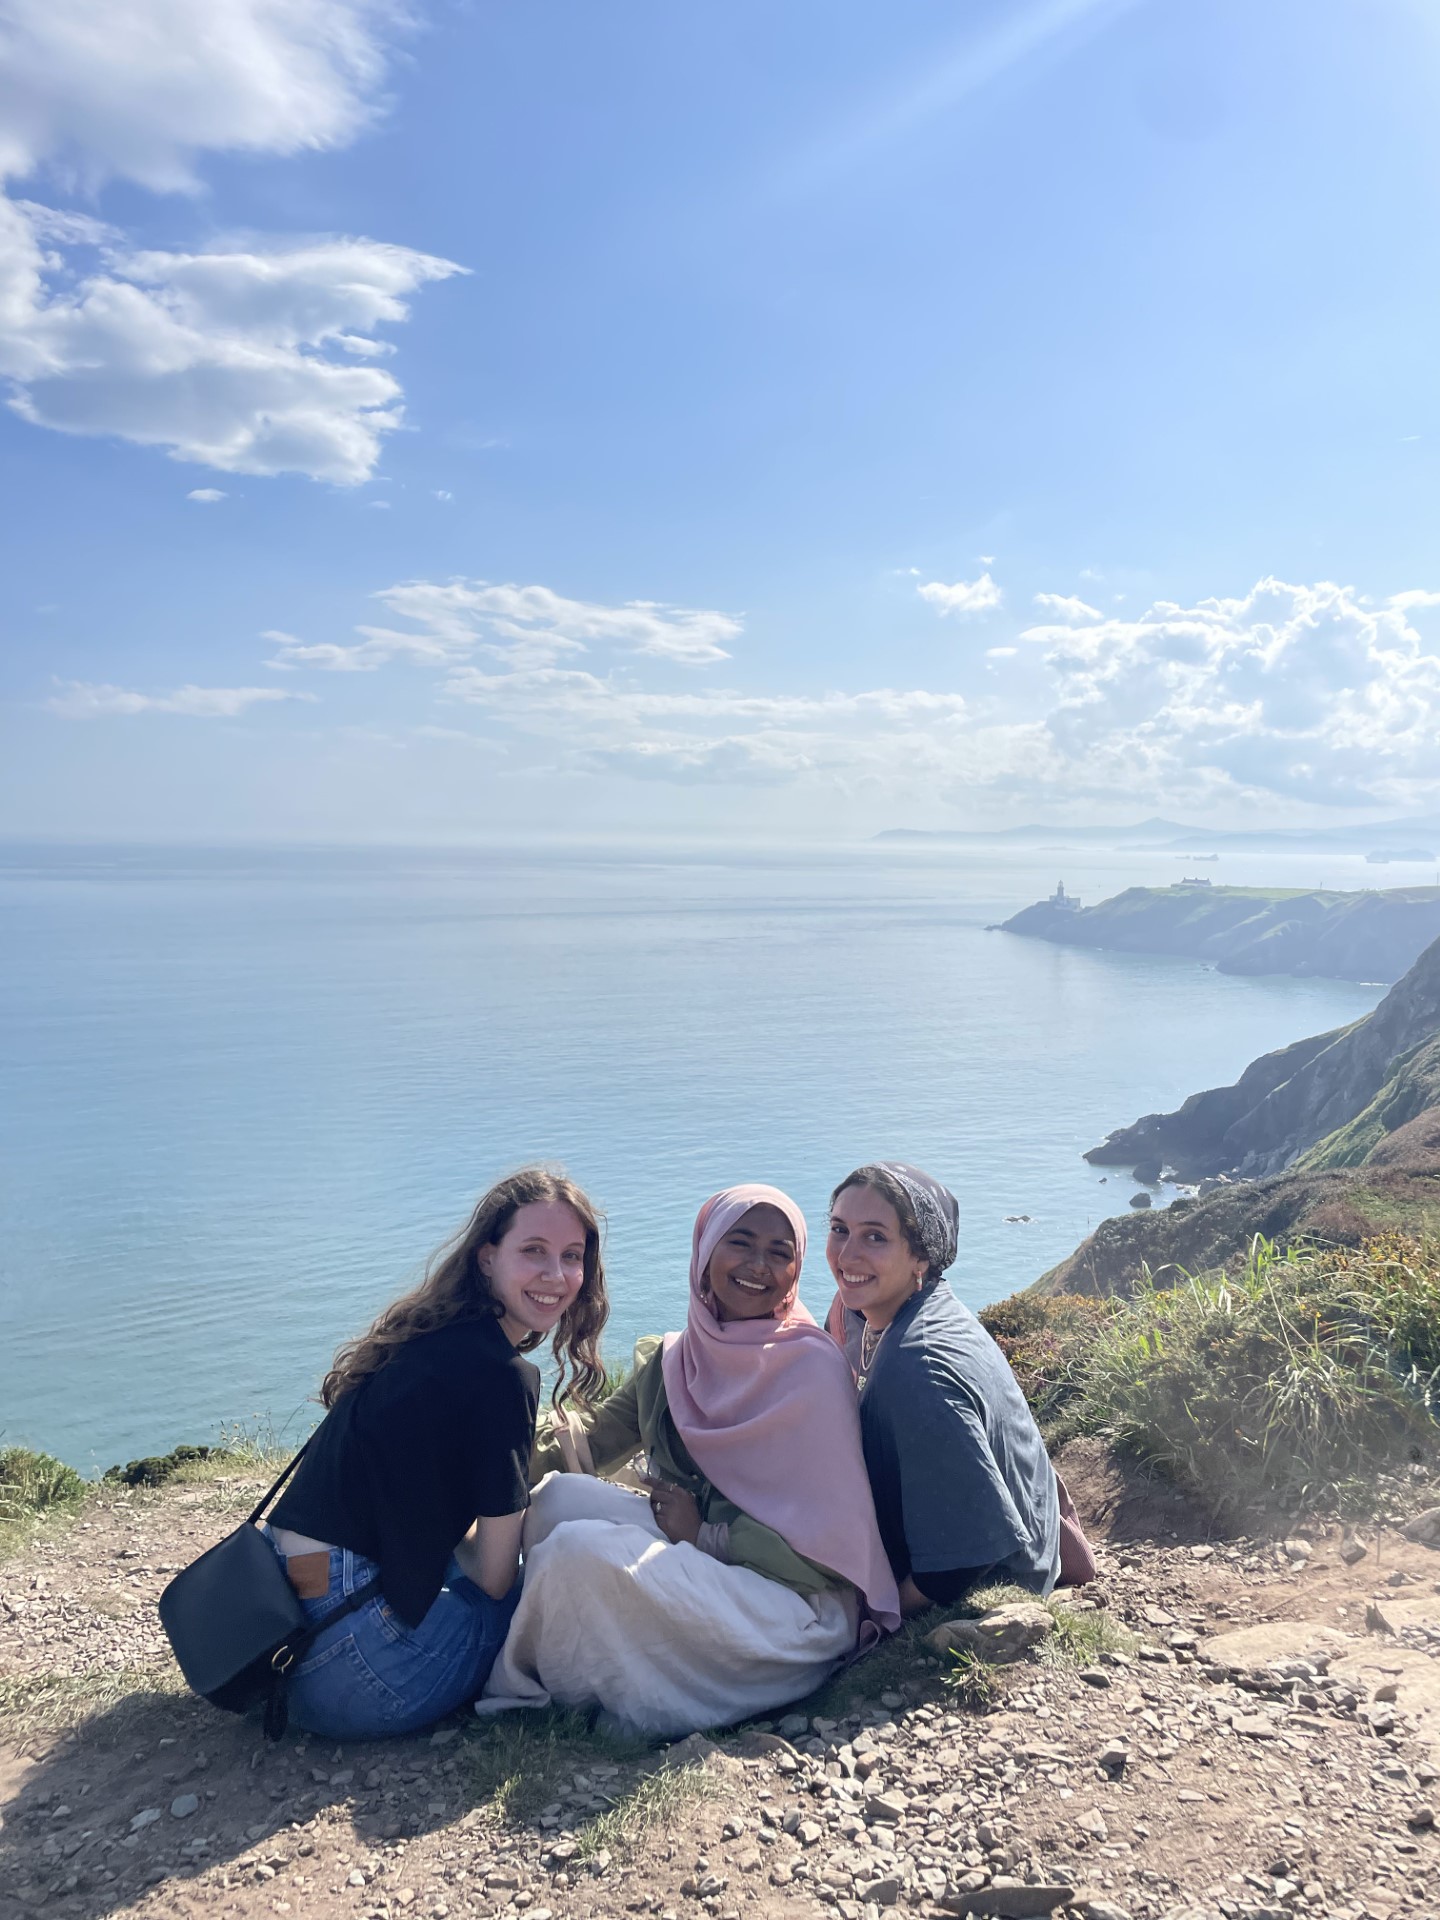 Sabirah (middle) hiking with two Erasmus students in Howth, Ireland alongside the Bog of Frogs Loop.